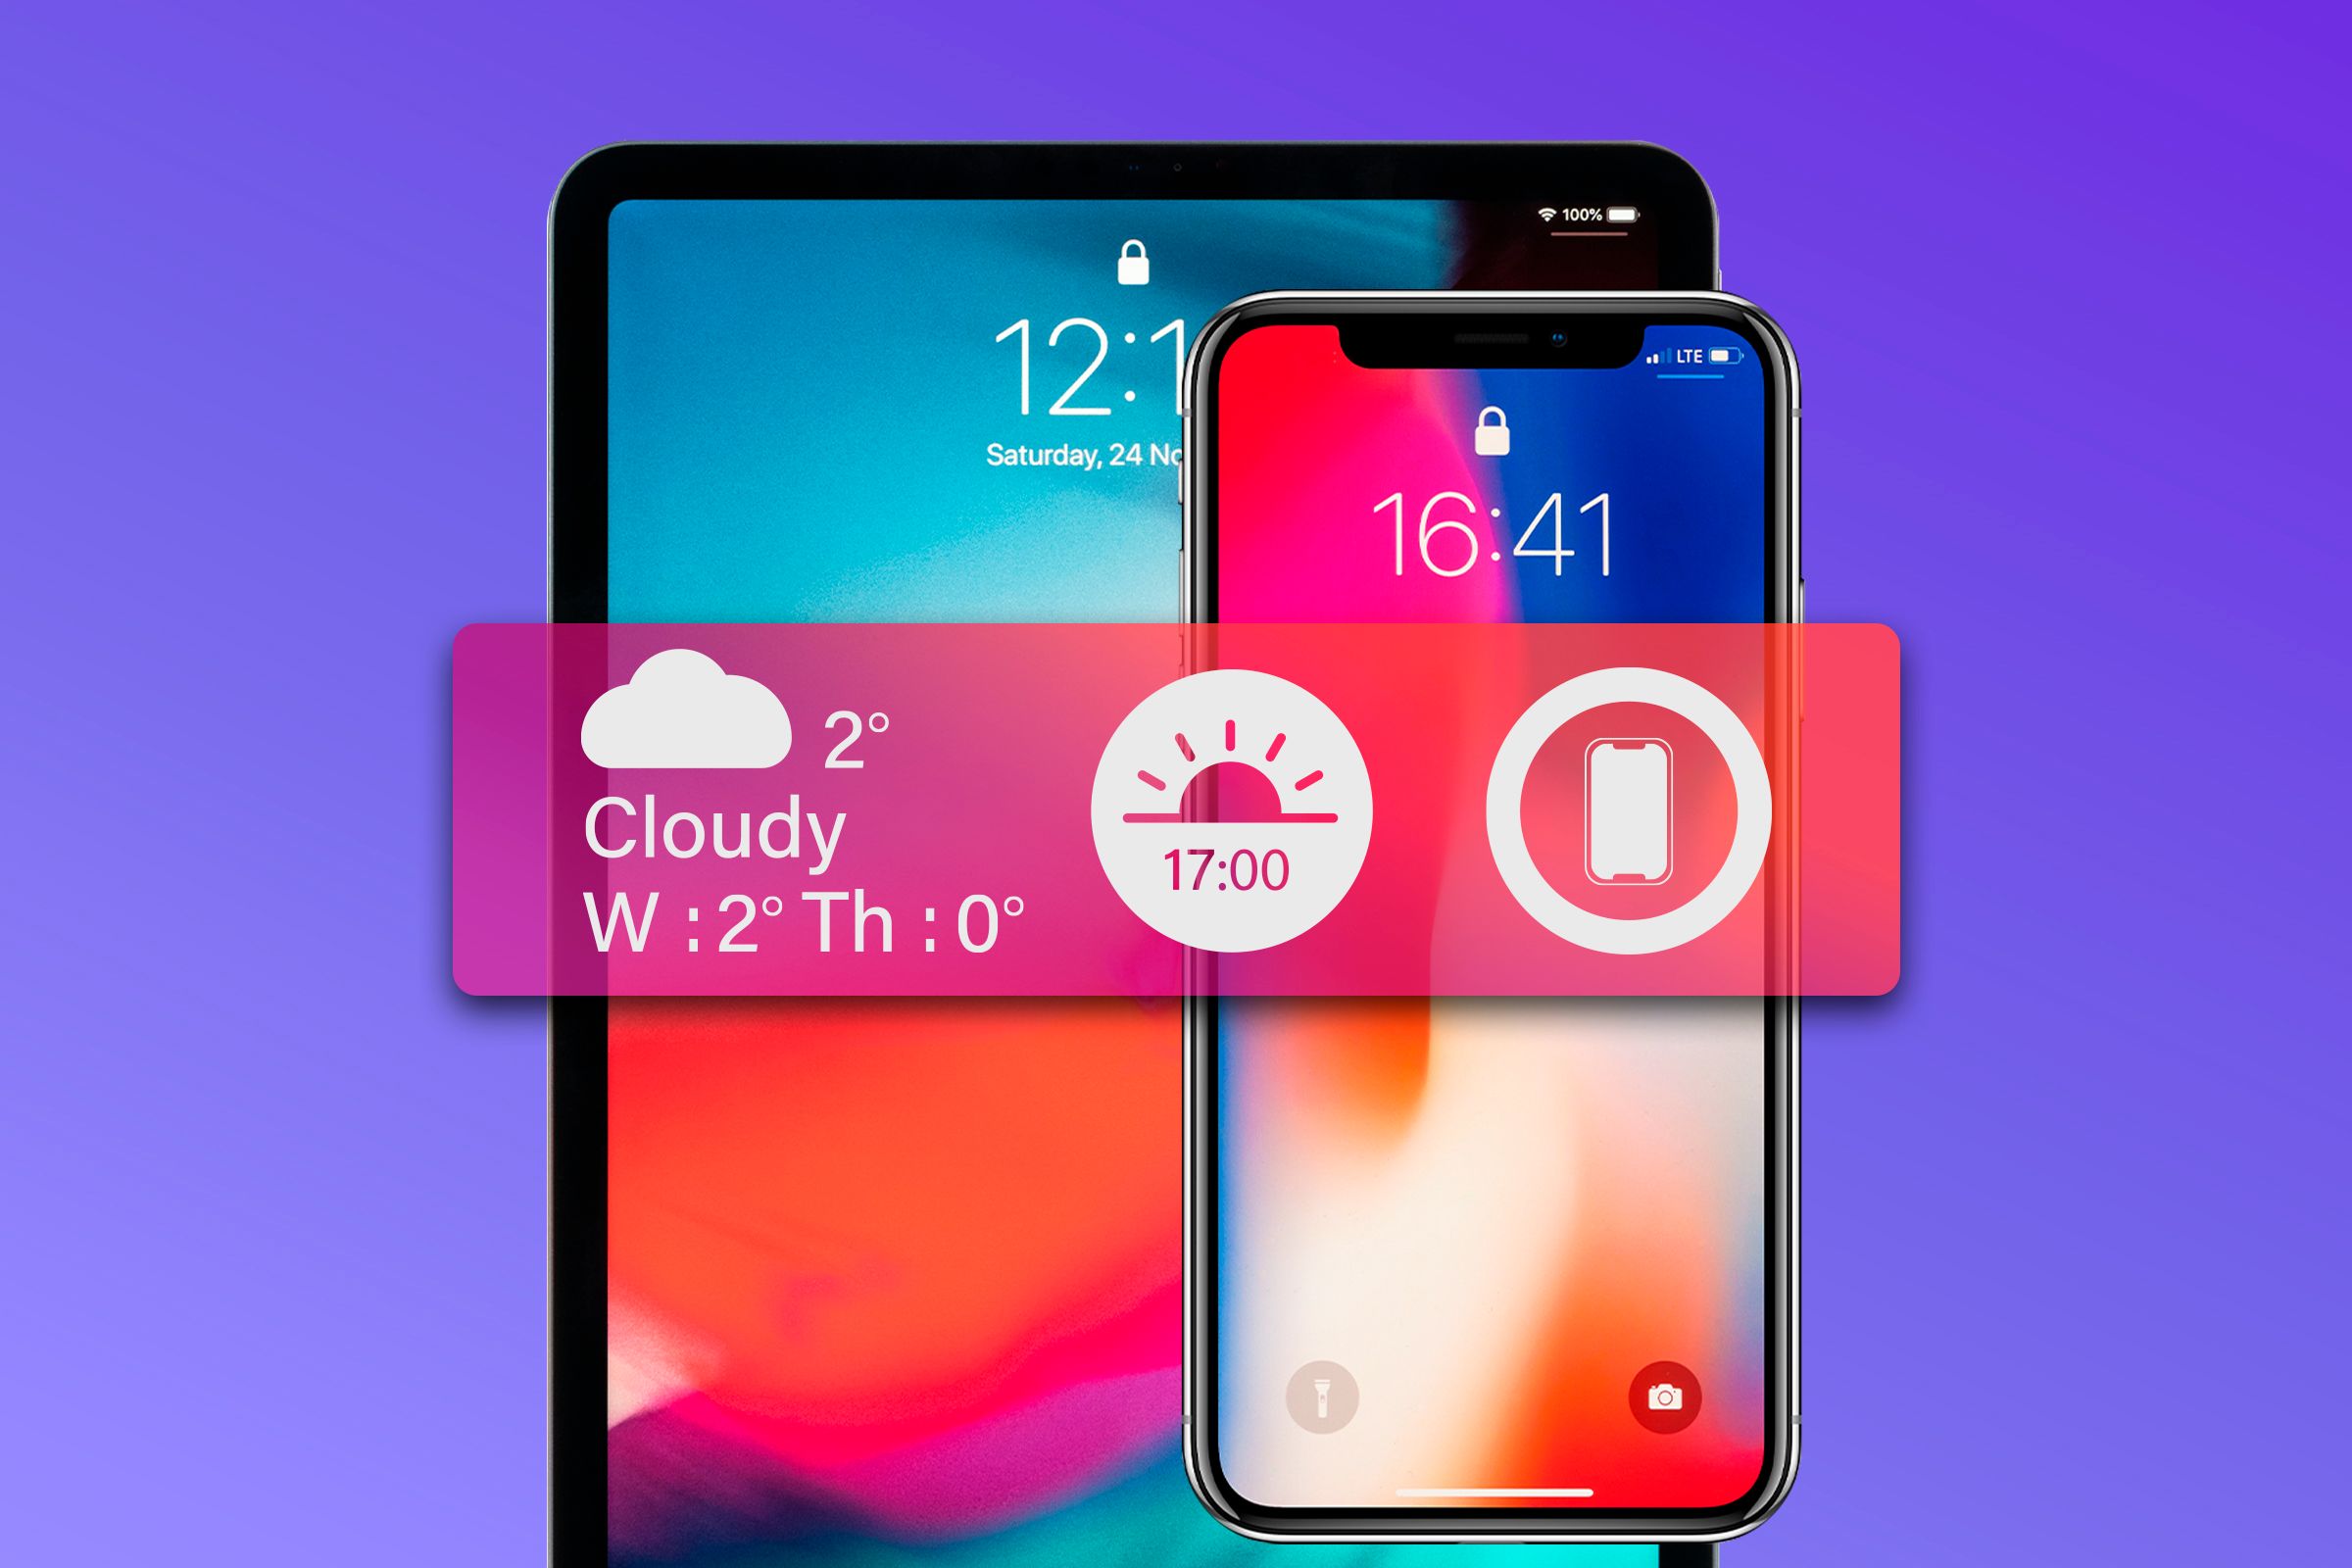 Some examples of widgets for iPhone and iPad. Behind them, an iPhone on the right and an iPad on the left behind the iPhone